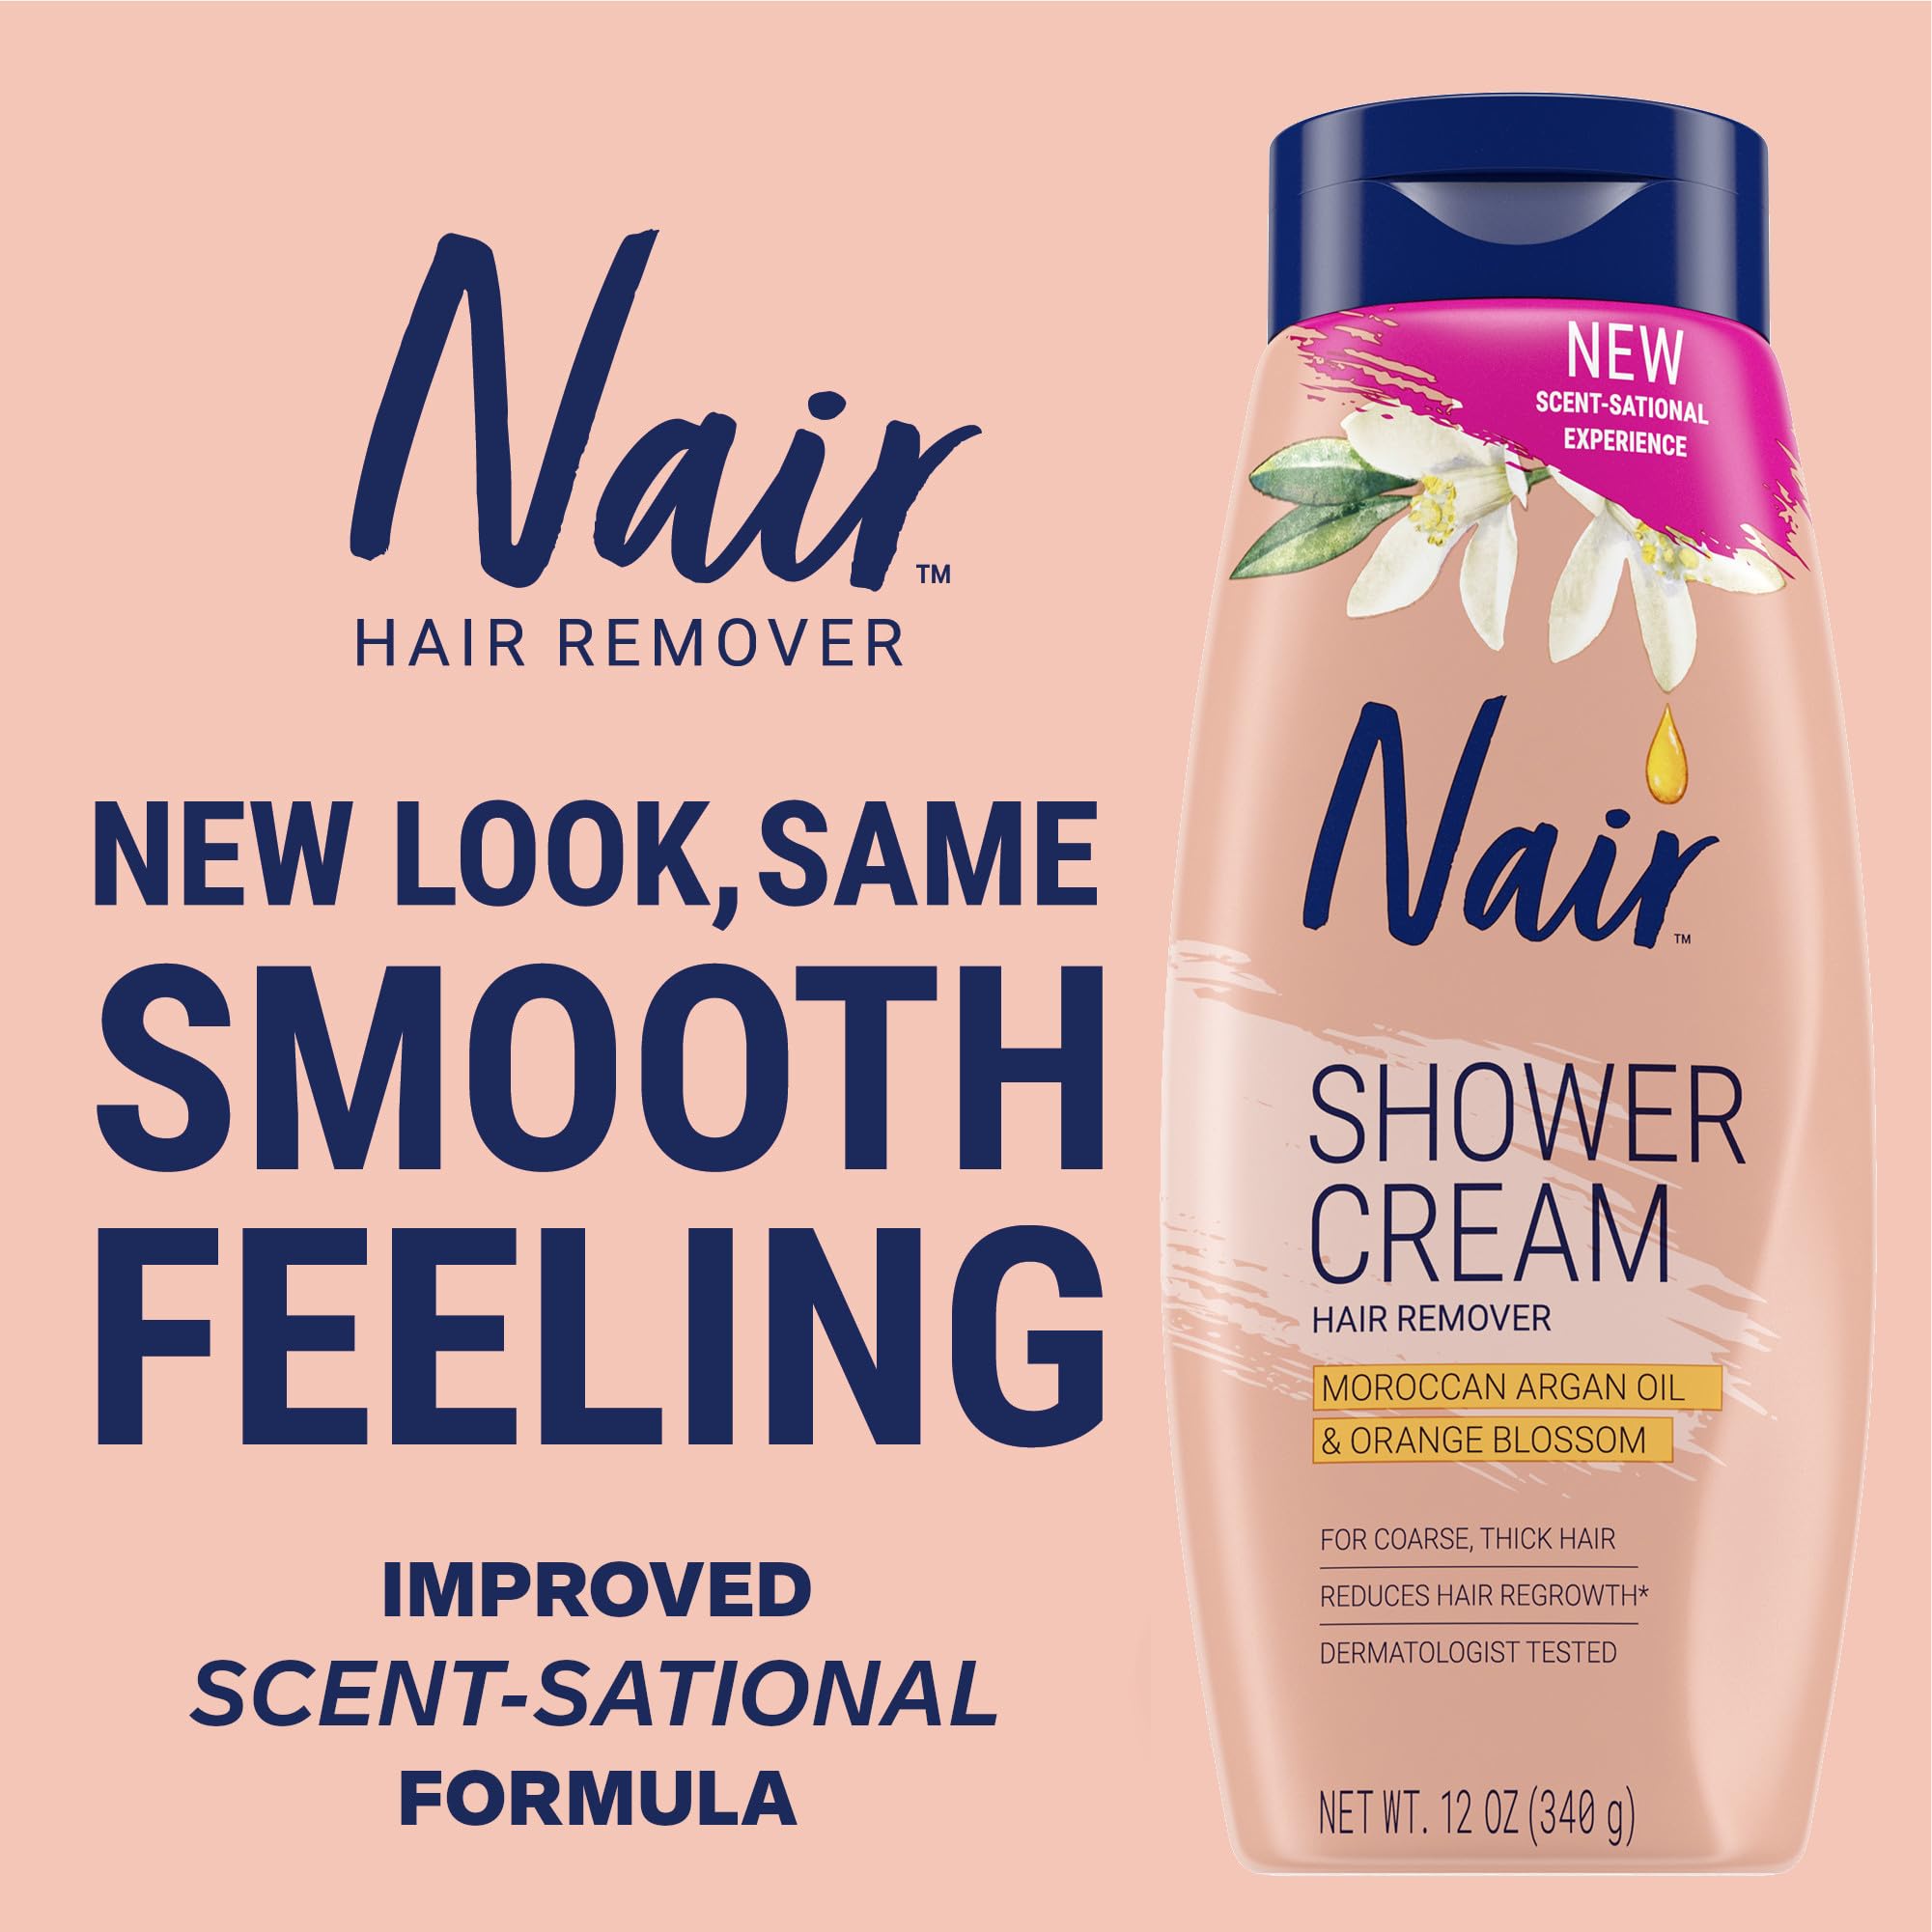 NAIR Shower Cream Hair Remover with Moroccan Argan Oil and Orange Blossom, Body Hair Removal Cream for Women, 12 oz